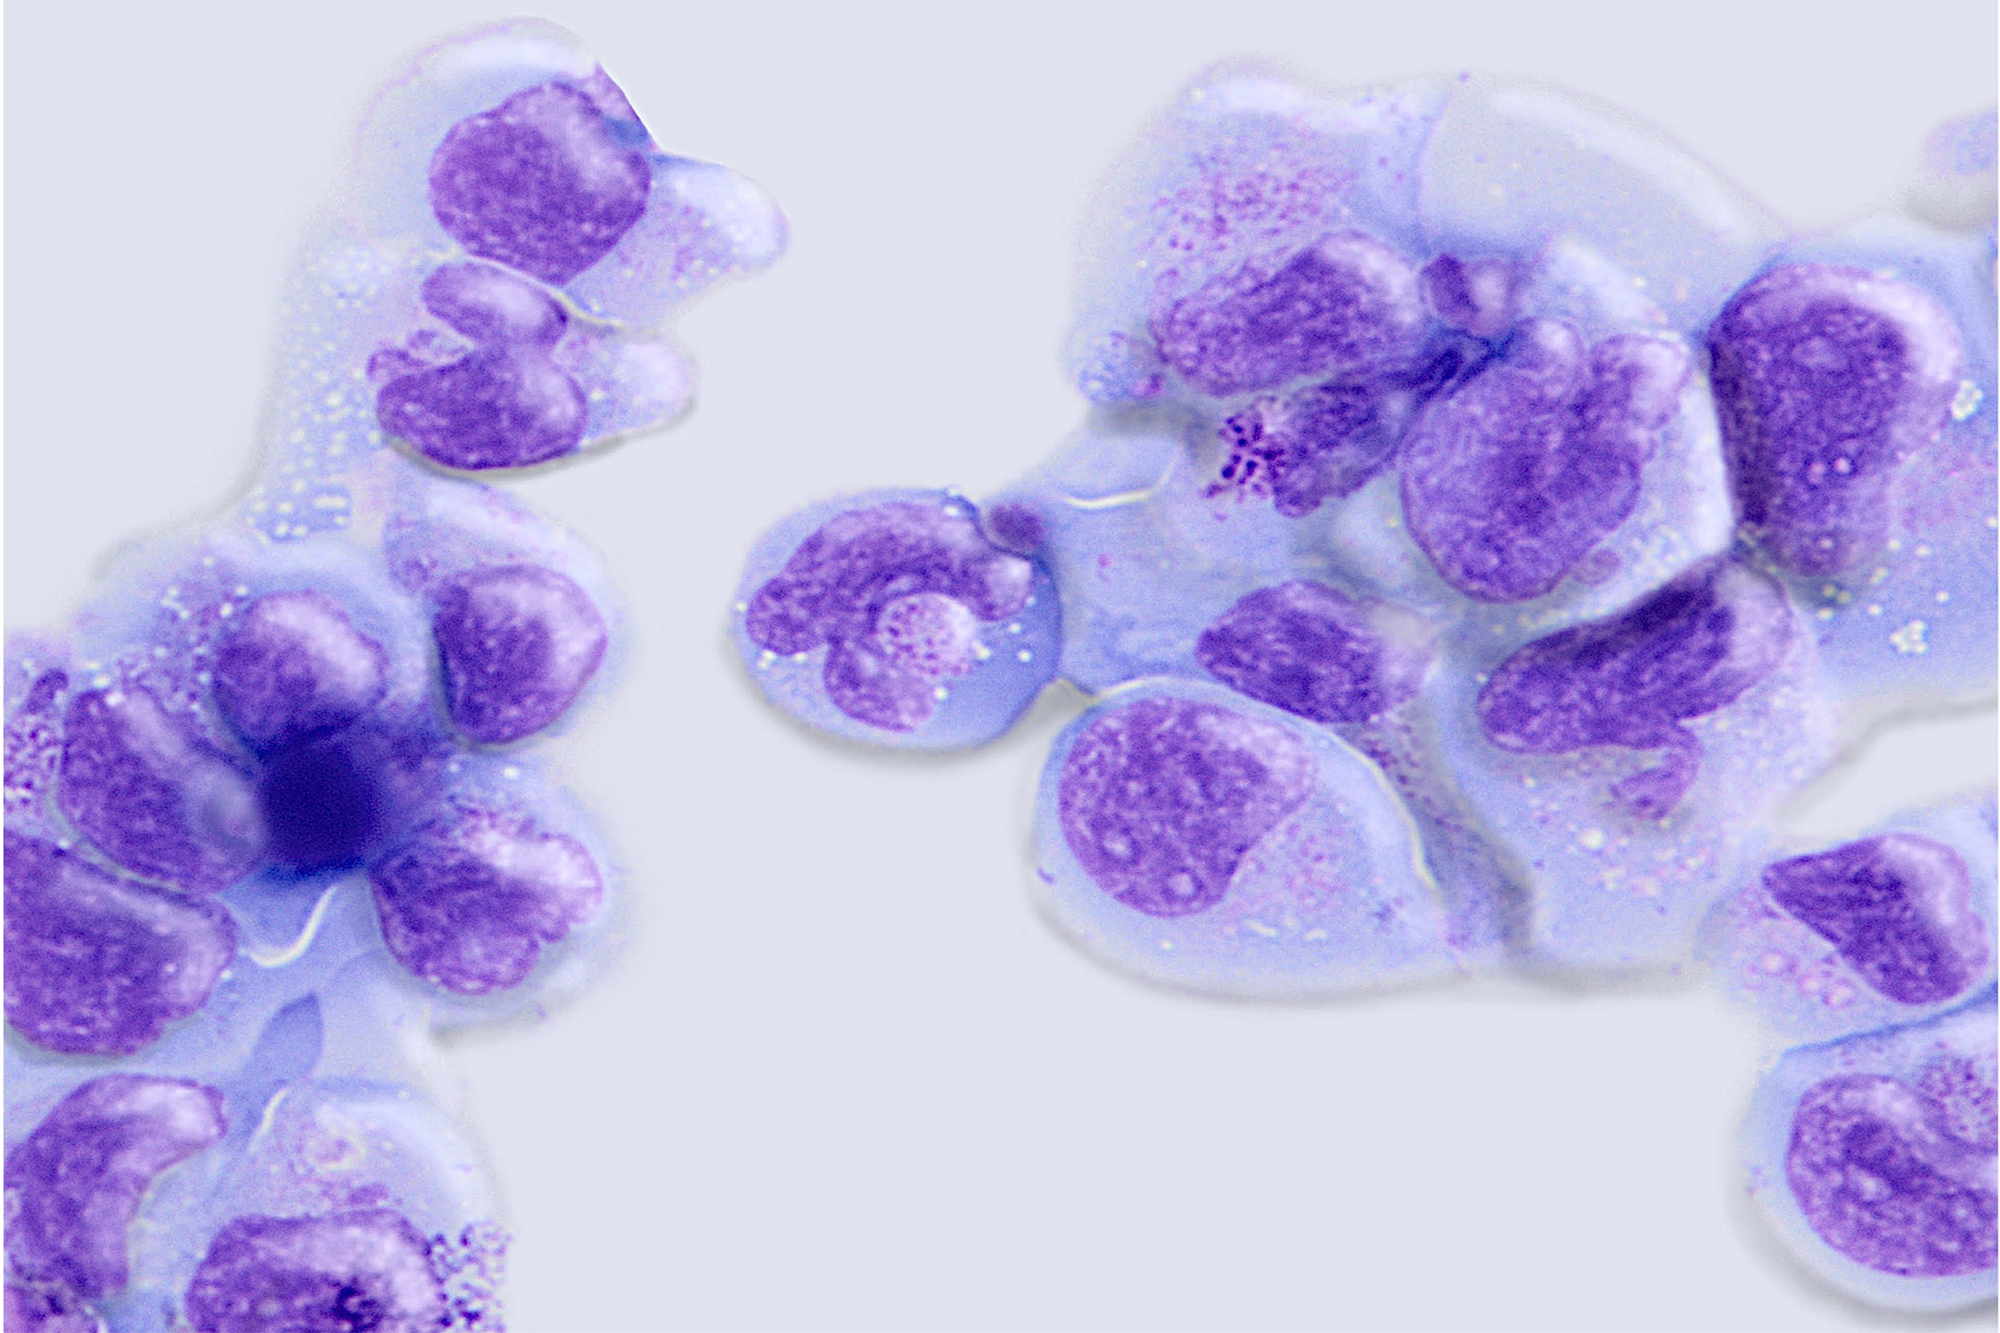 Canine iNKT cells.